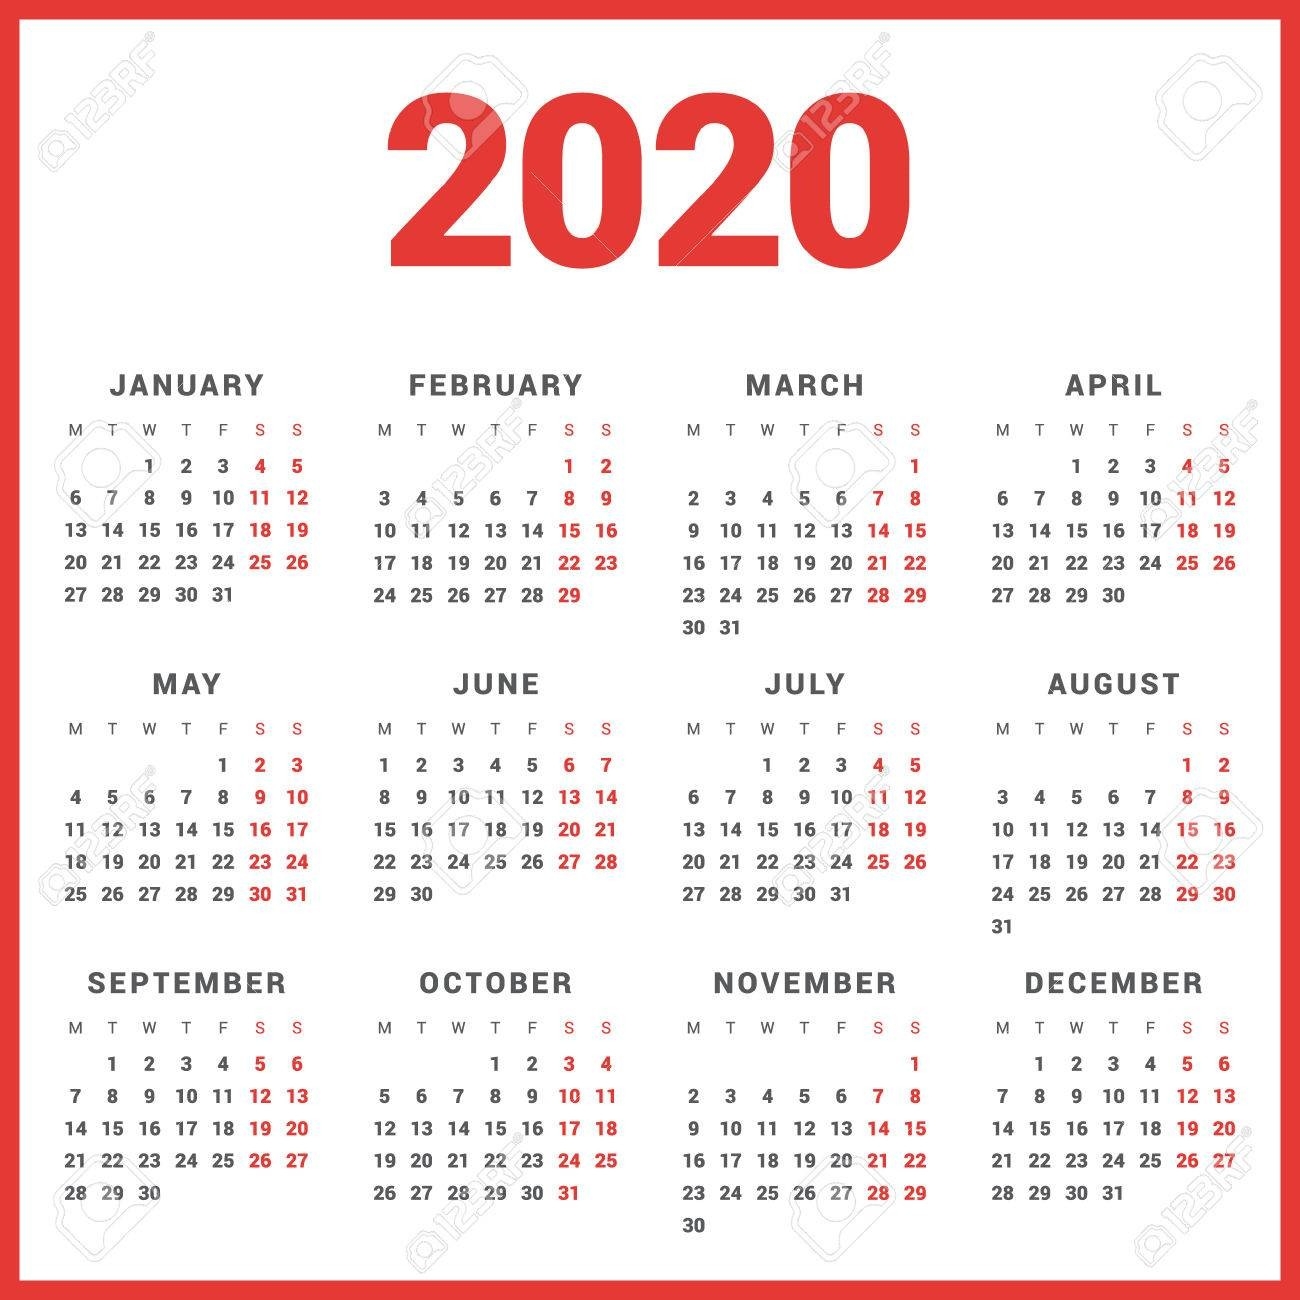 Calendar For 2020 Year On White Background. Week Starts Monday-Printable Calendar 2020 Monthly Monday Weekday Start